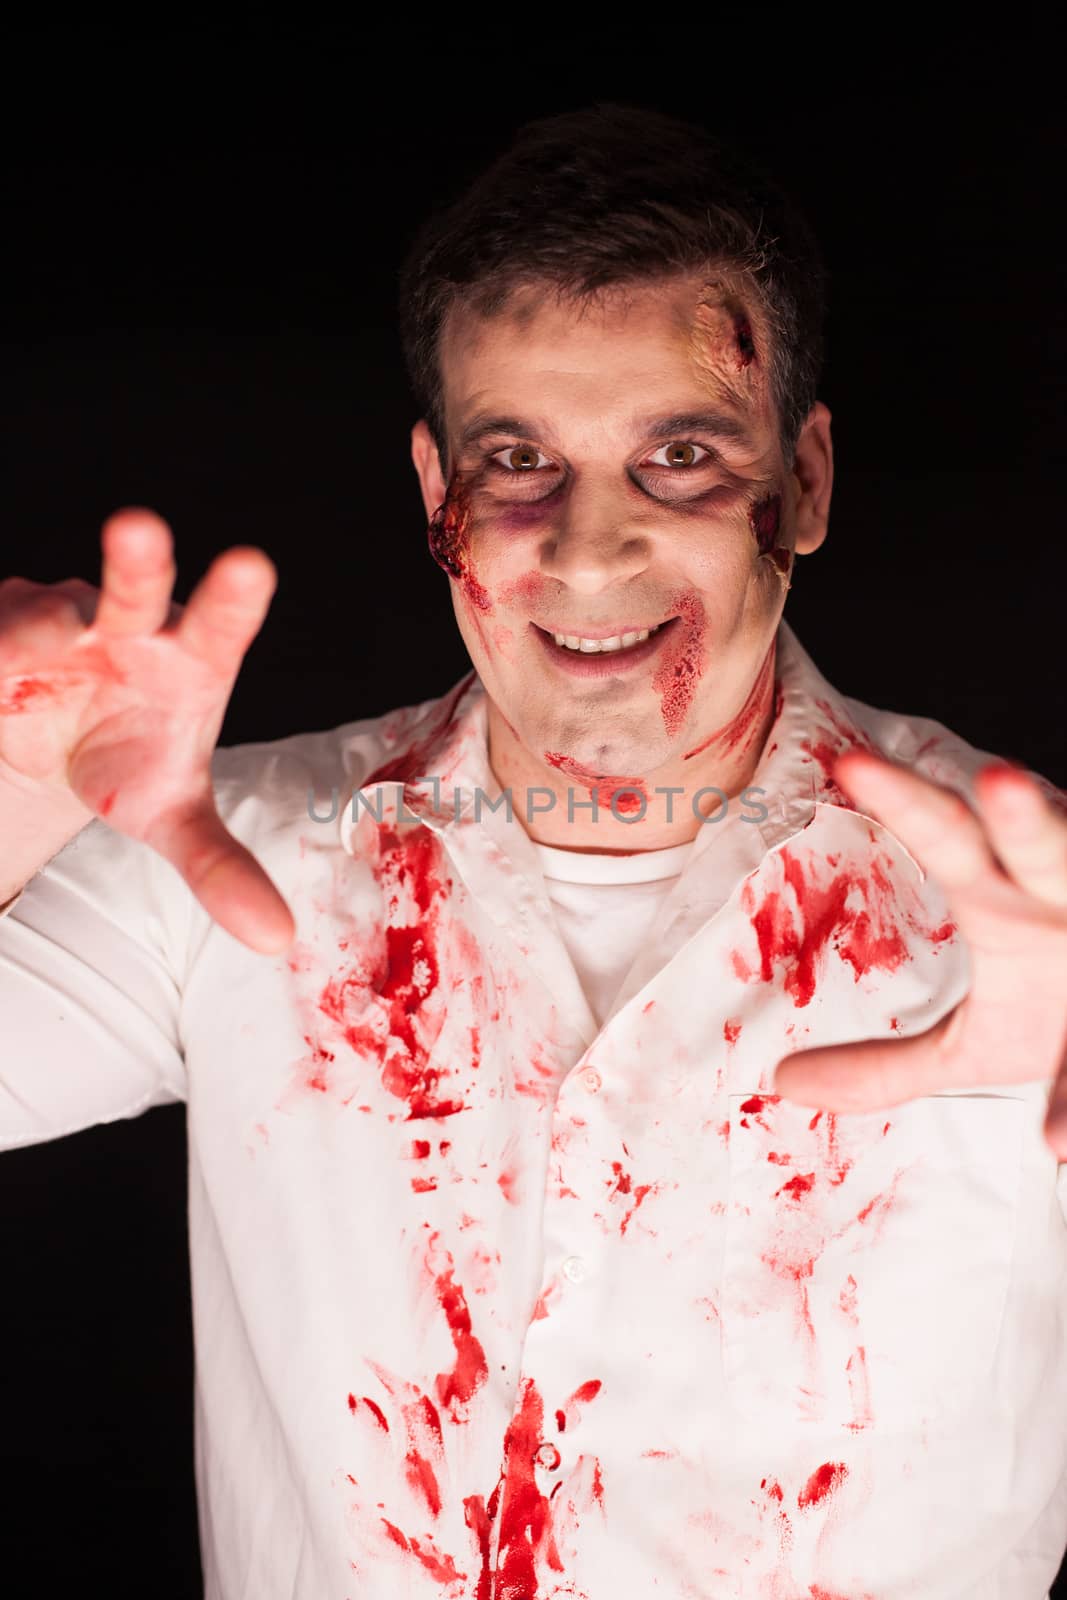 Creative make up of man dressed up like zombie for halloween.